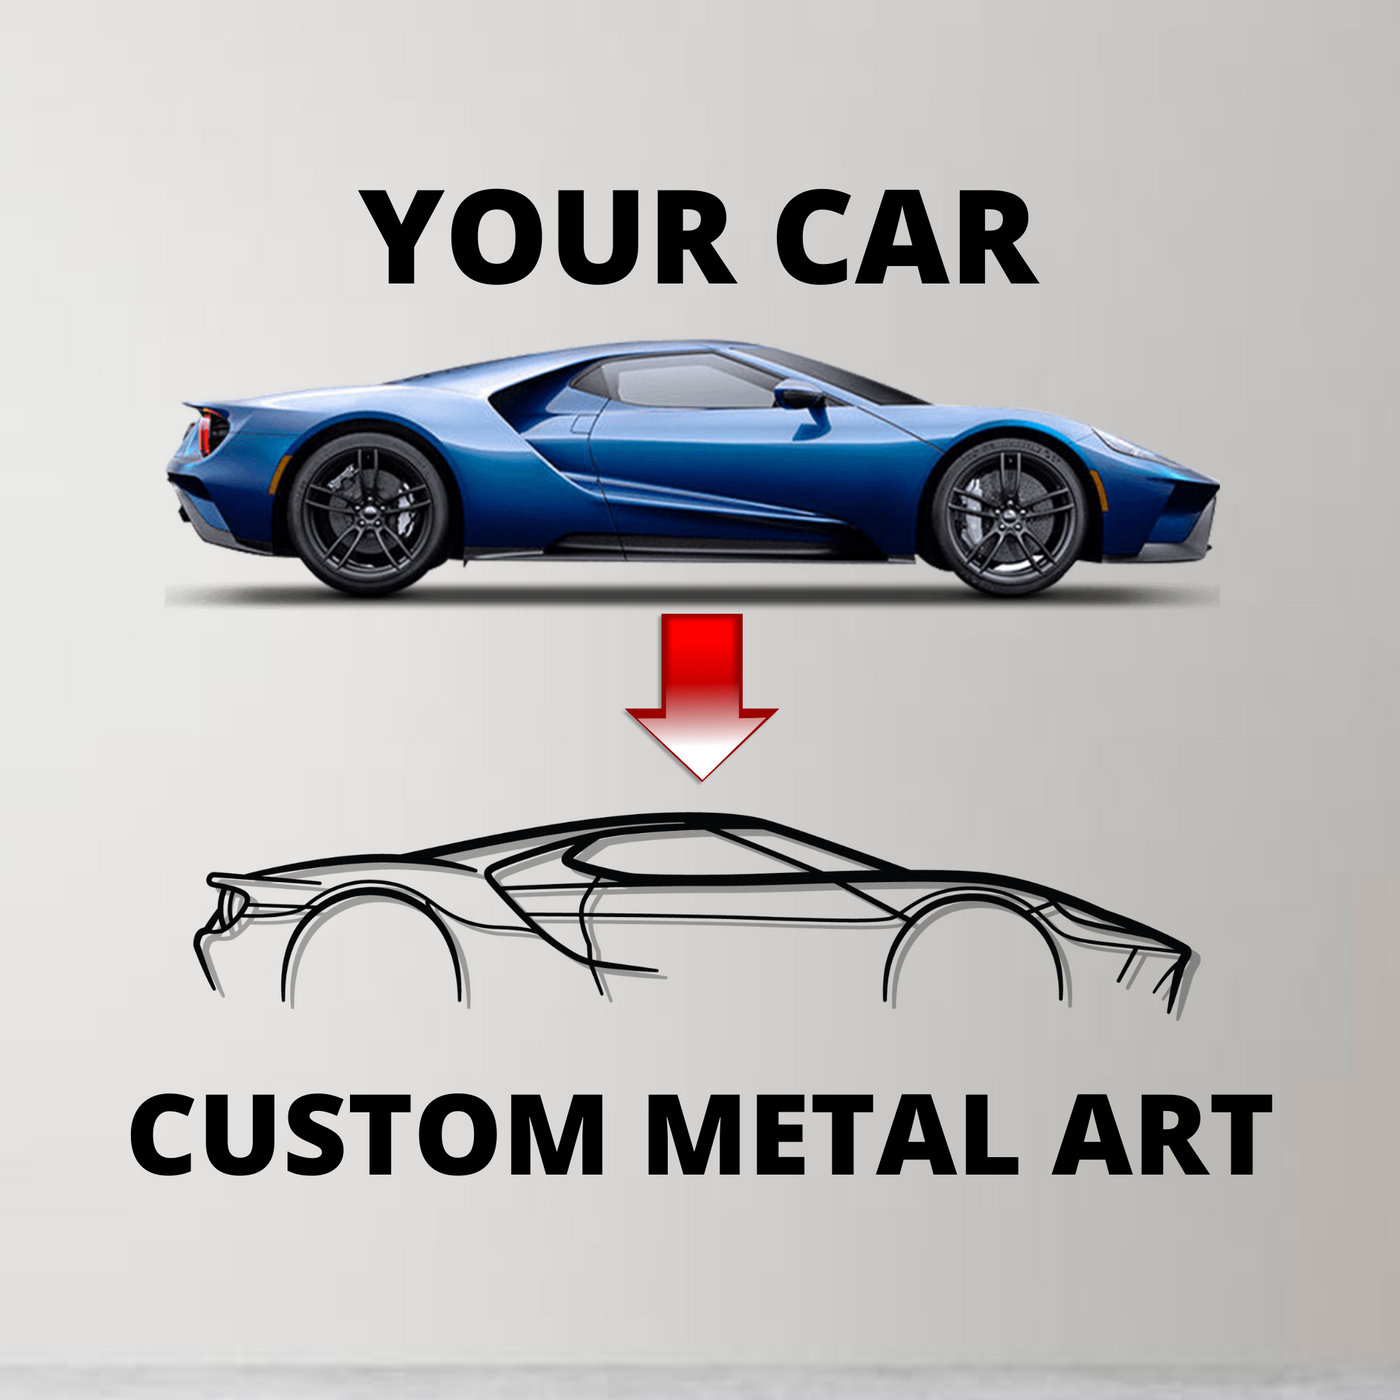 M3 G80 Performance Front Silhouette Metal Wall Art